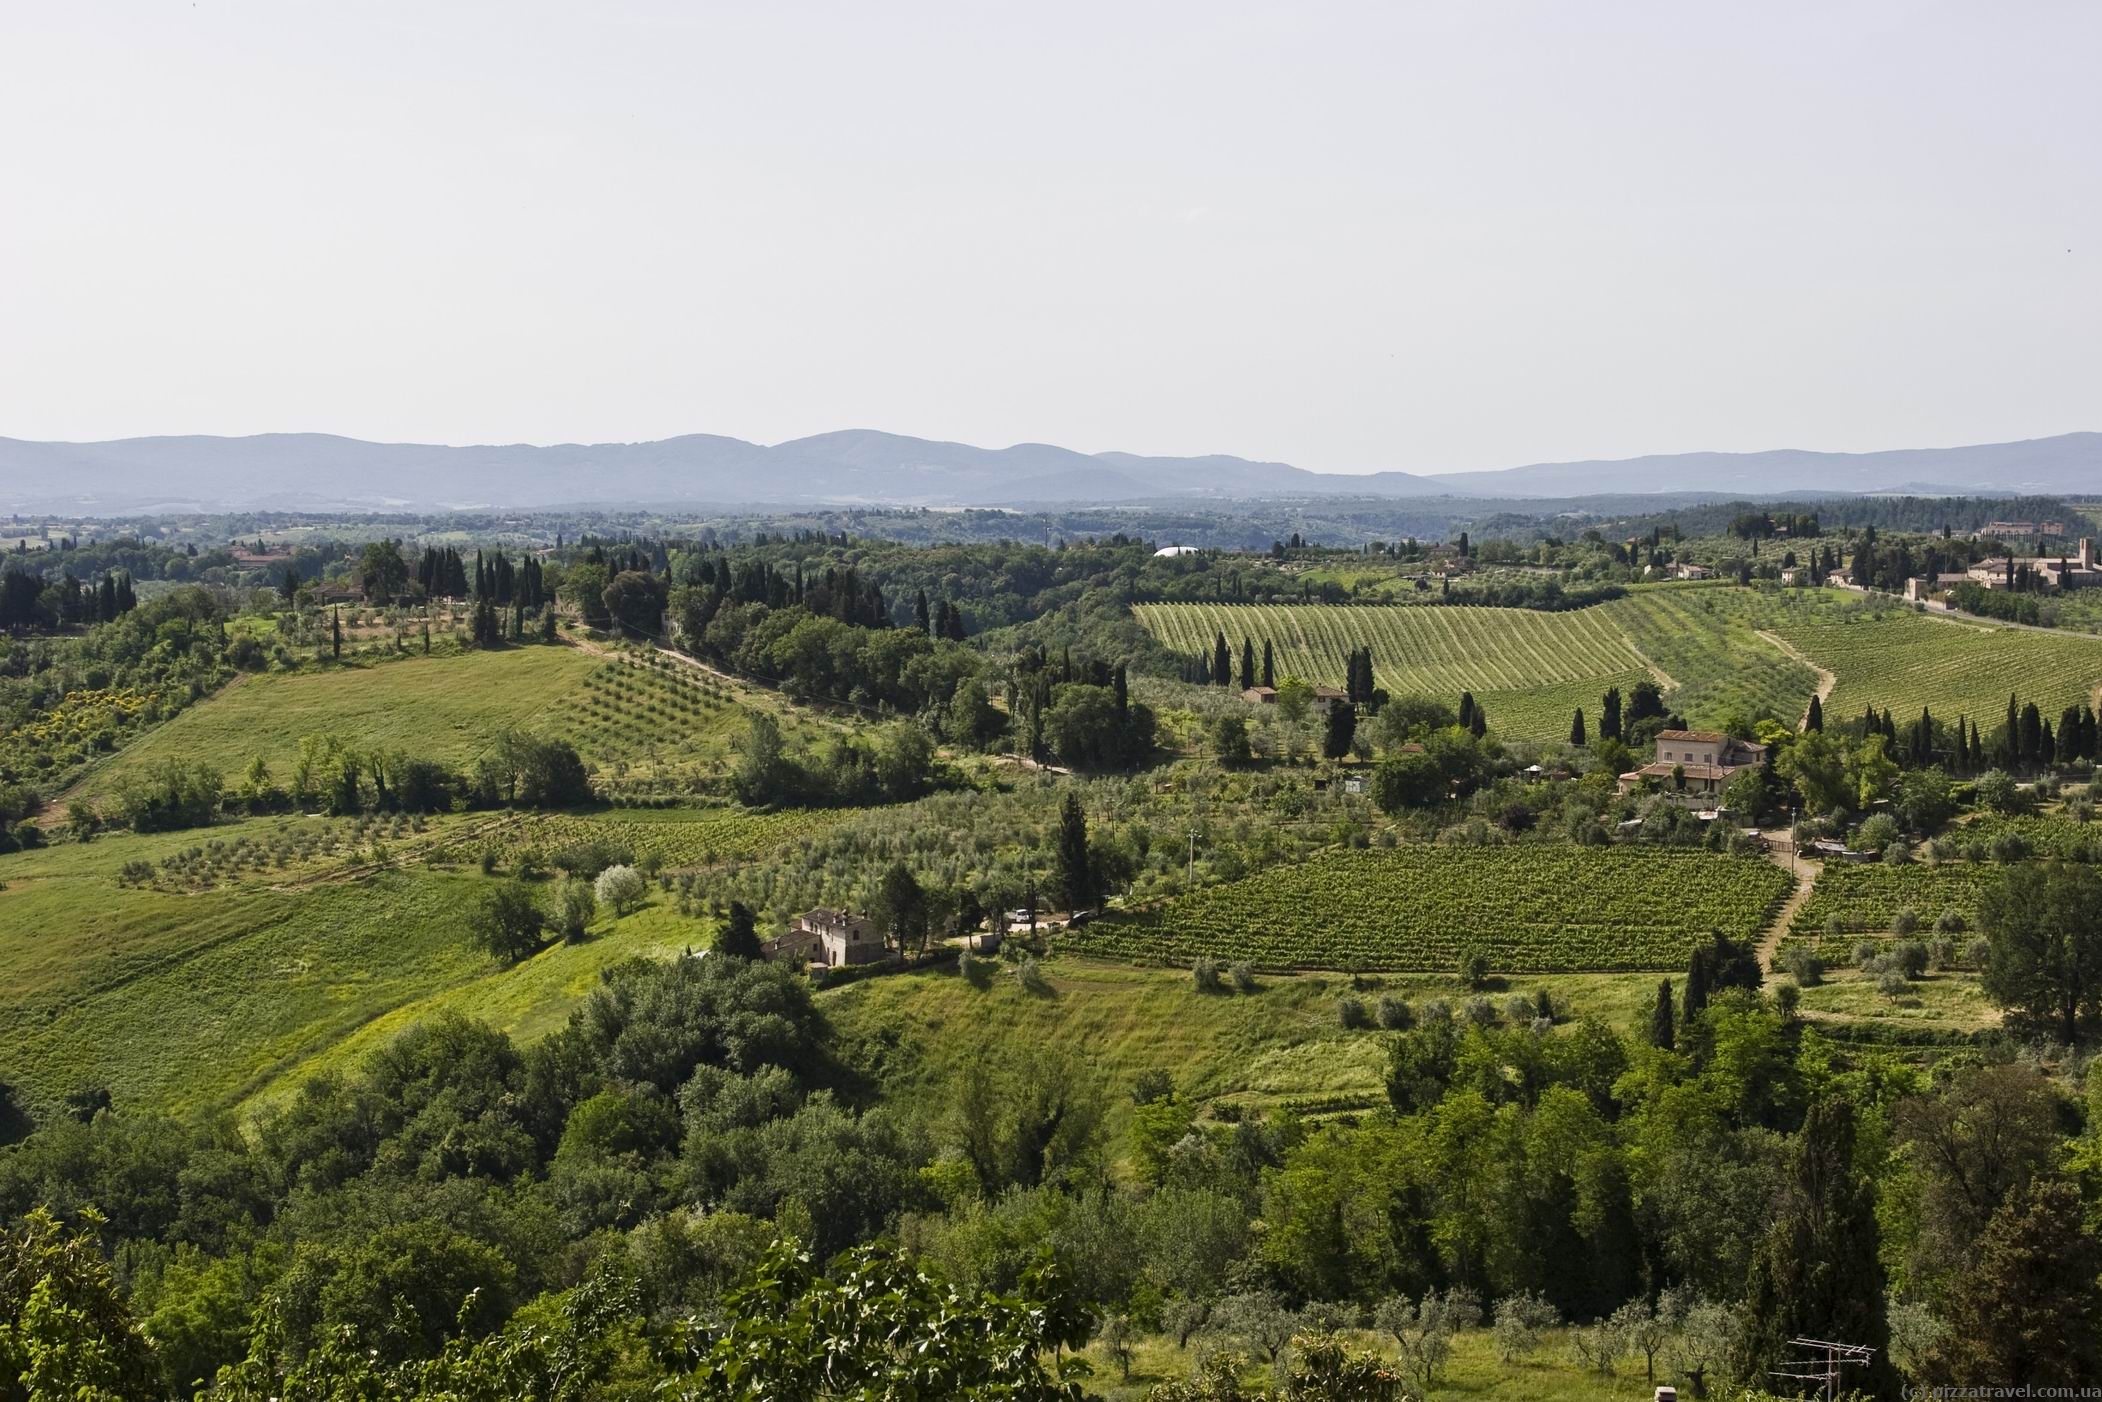 San Gimignano - Italy - Blog about interesting places